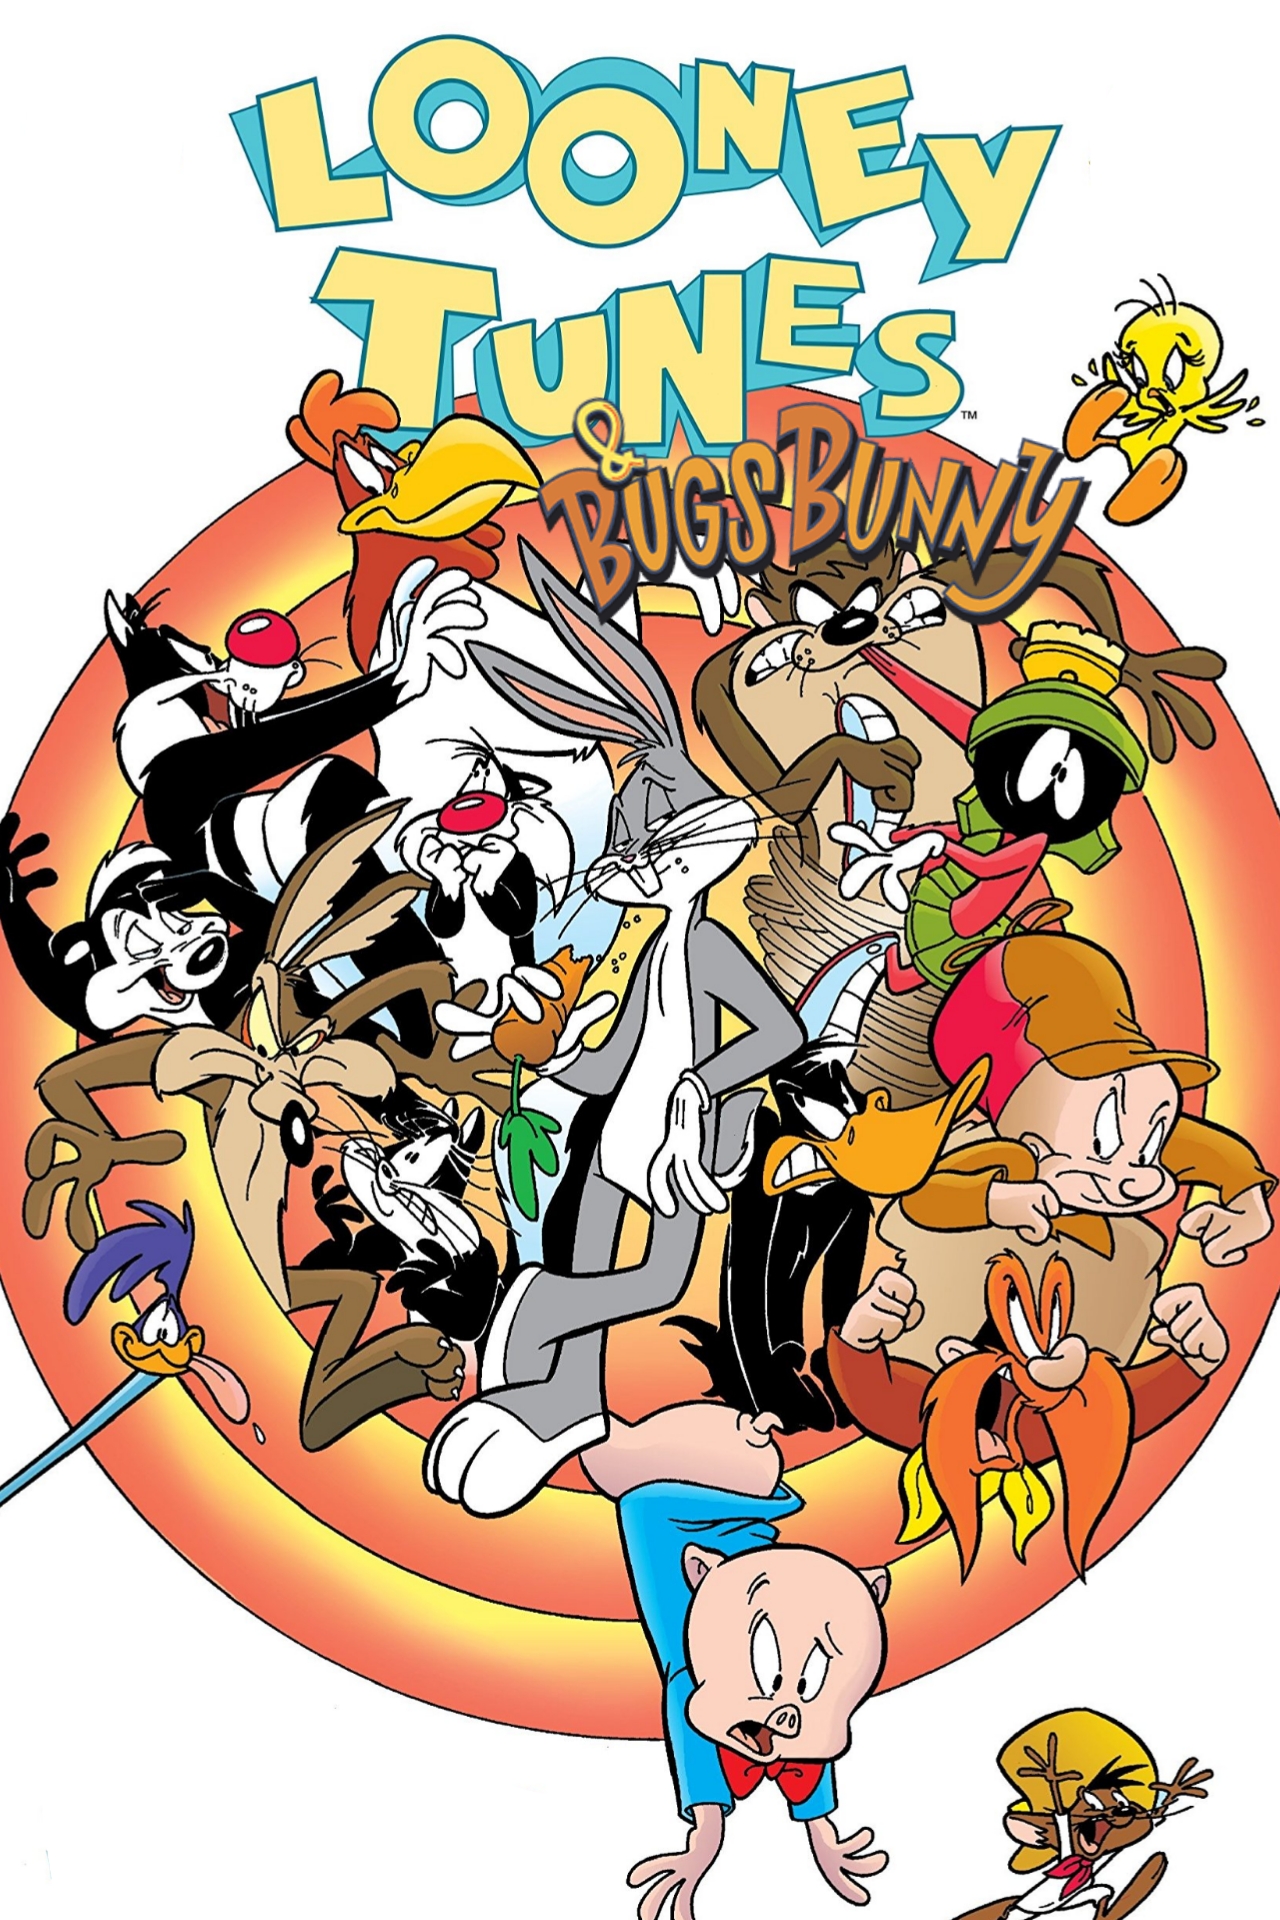 Looney-Toons-Best-Old-Hindi-Dubbed-Cartoons-That-We-All-Love - Pop Culture,  Entertainment, Humor, Travel & More